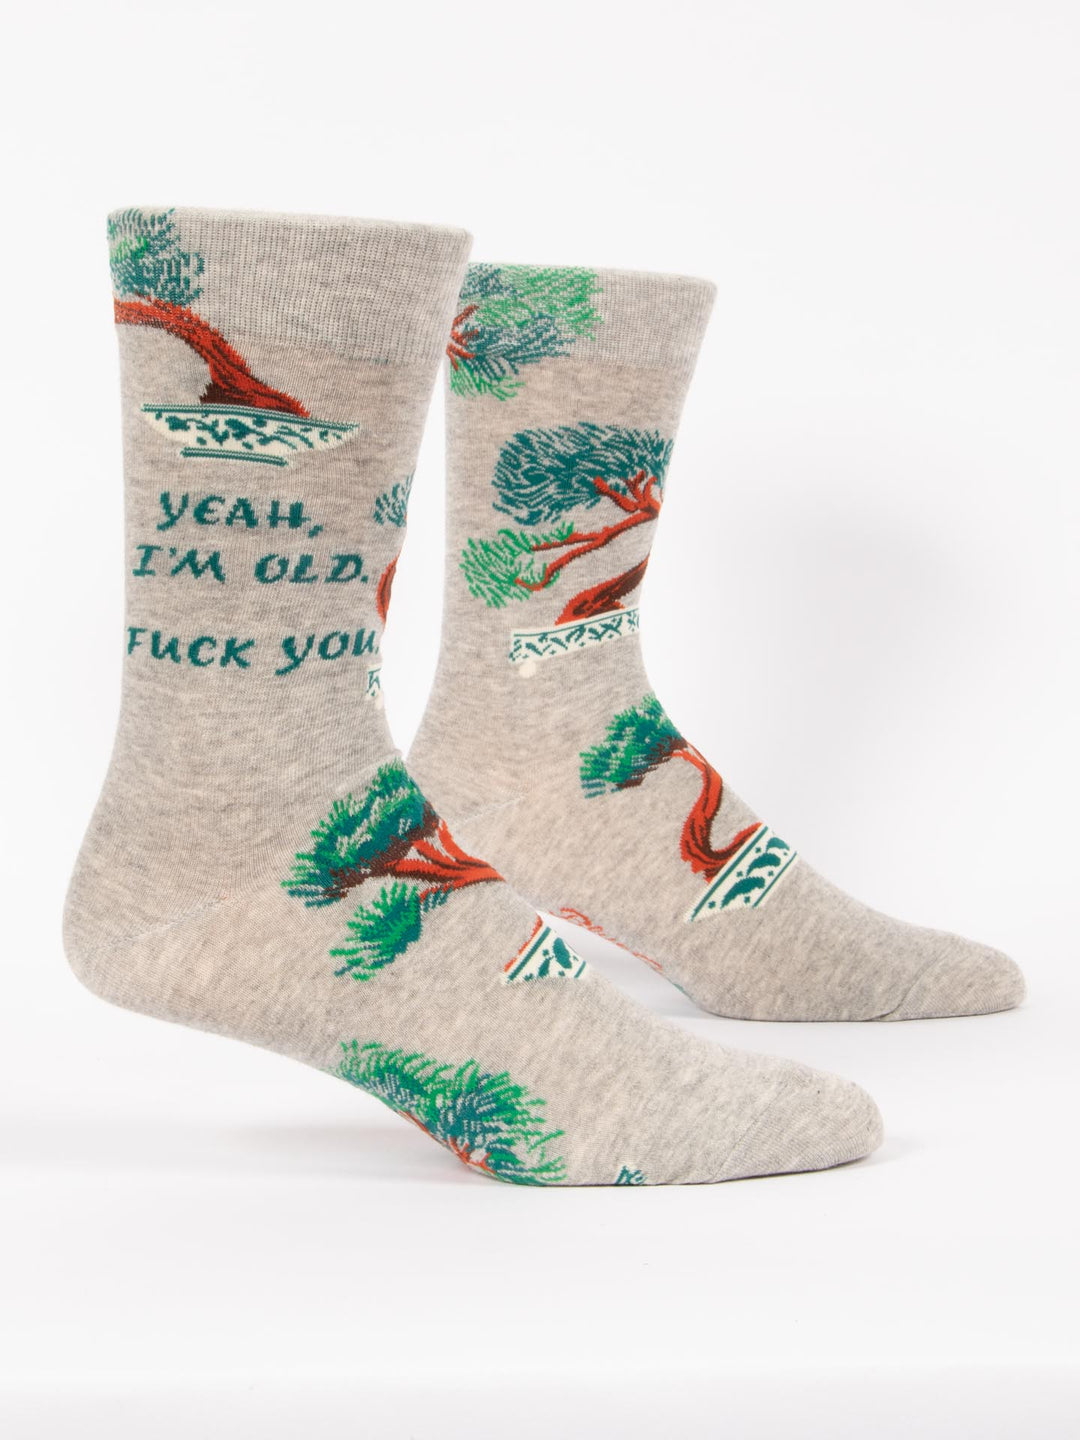 Yeah, I'm Old. Fuck You. Men's Crew Socks - Kingfisher Road - Online Boutique